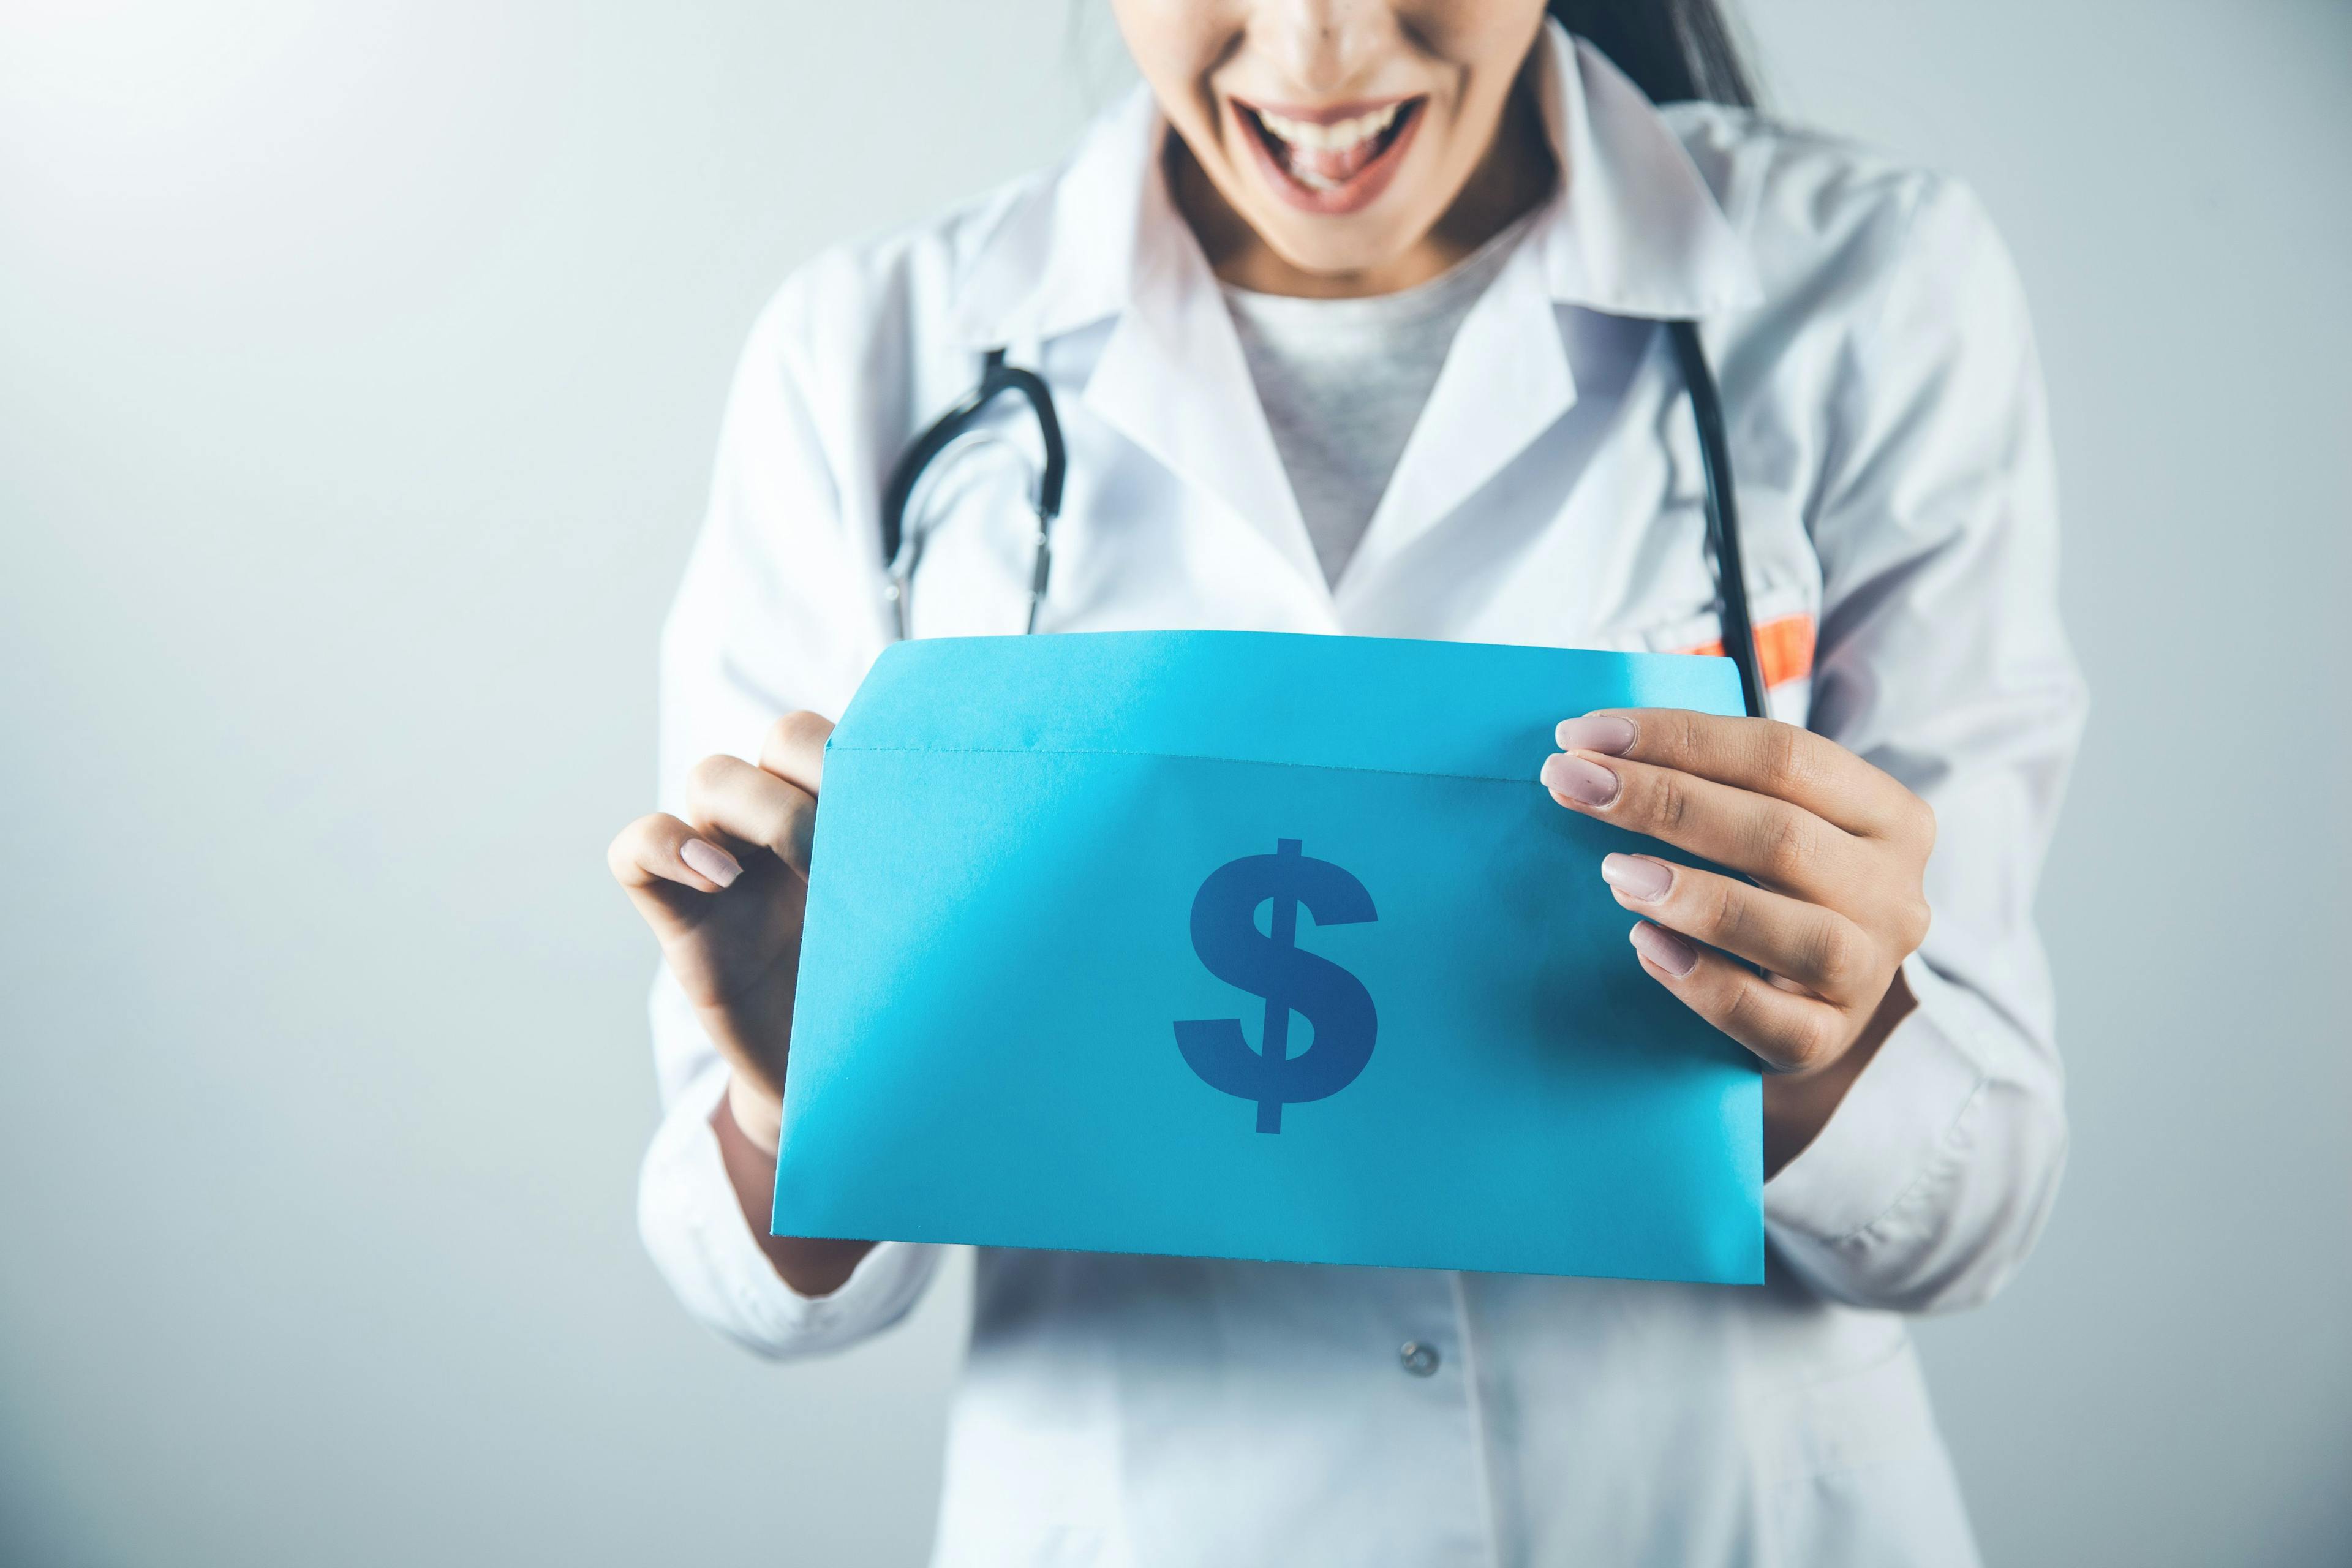 Study: Independent practices dwindling as physician employment booms